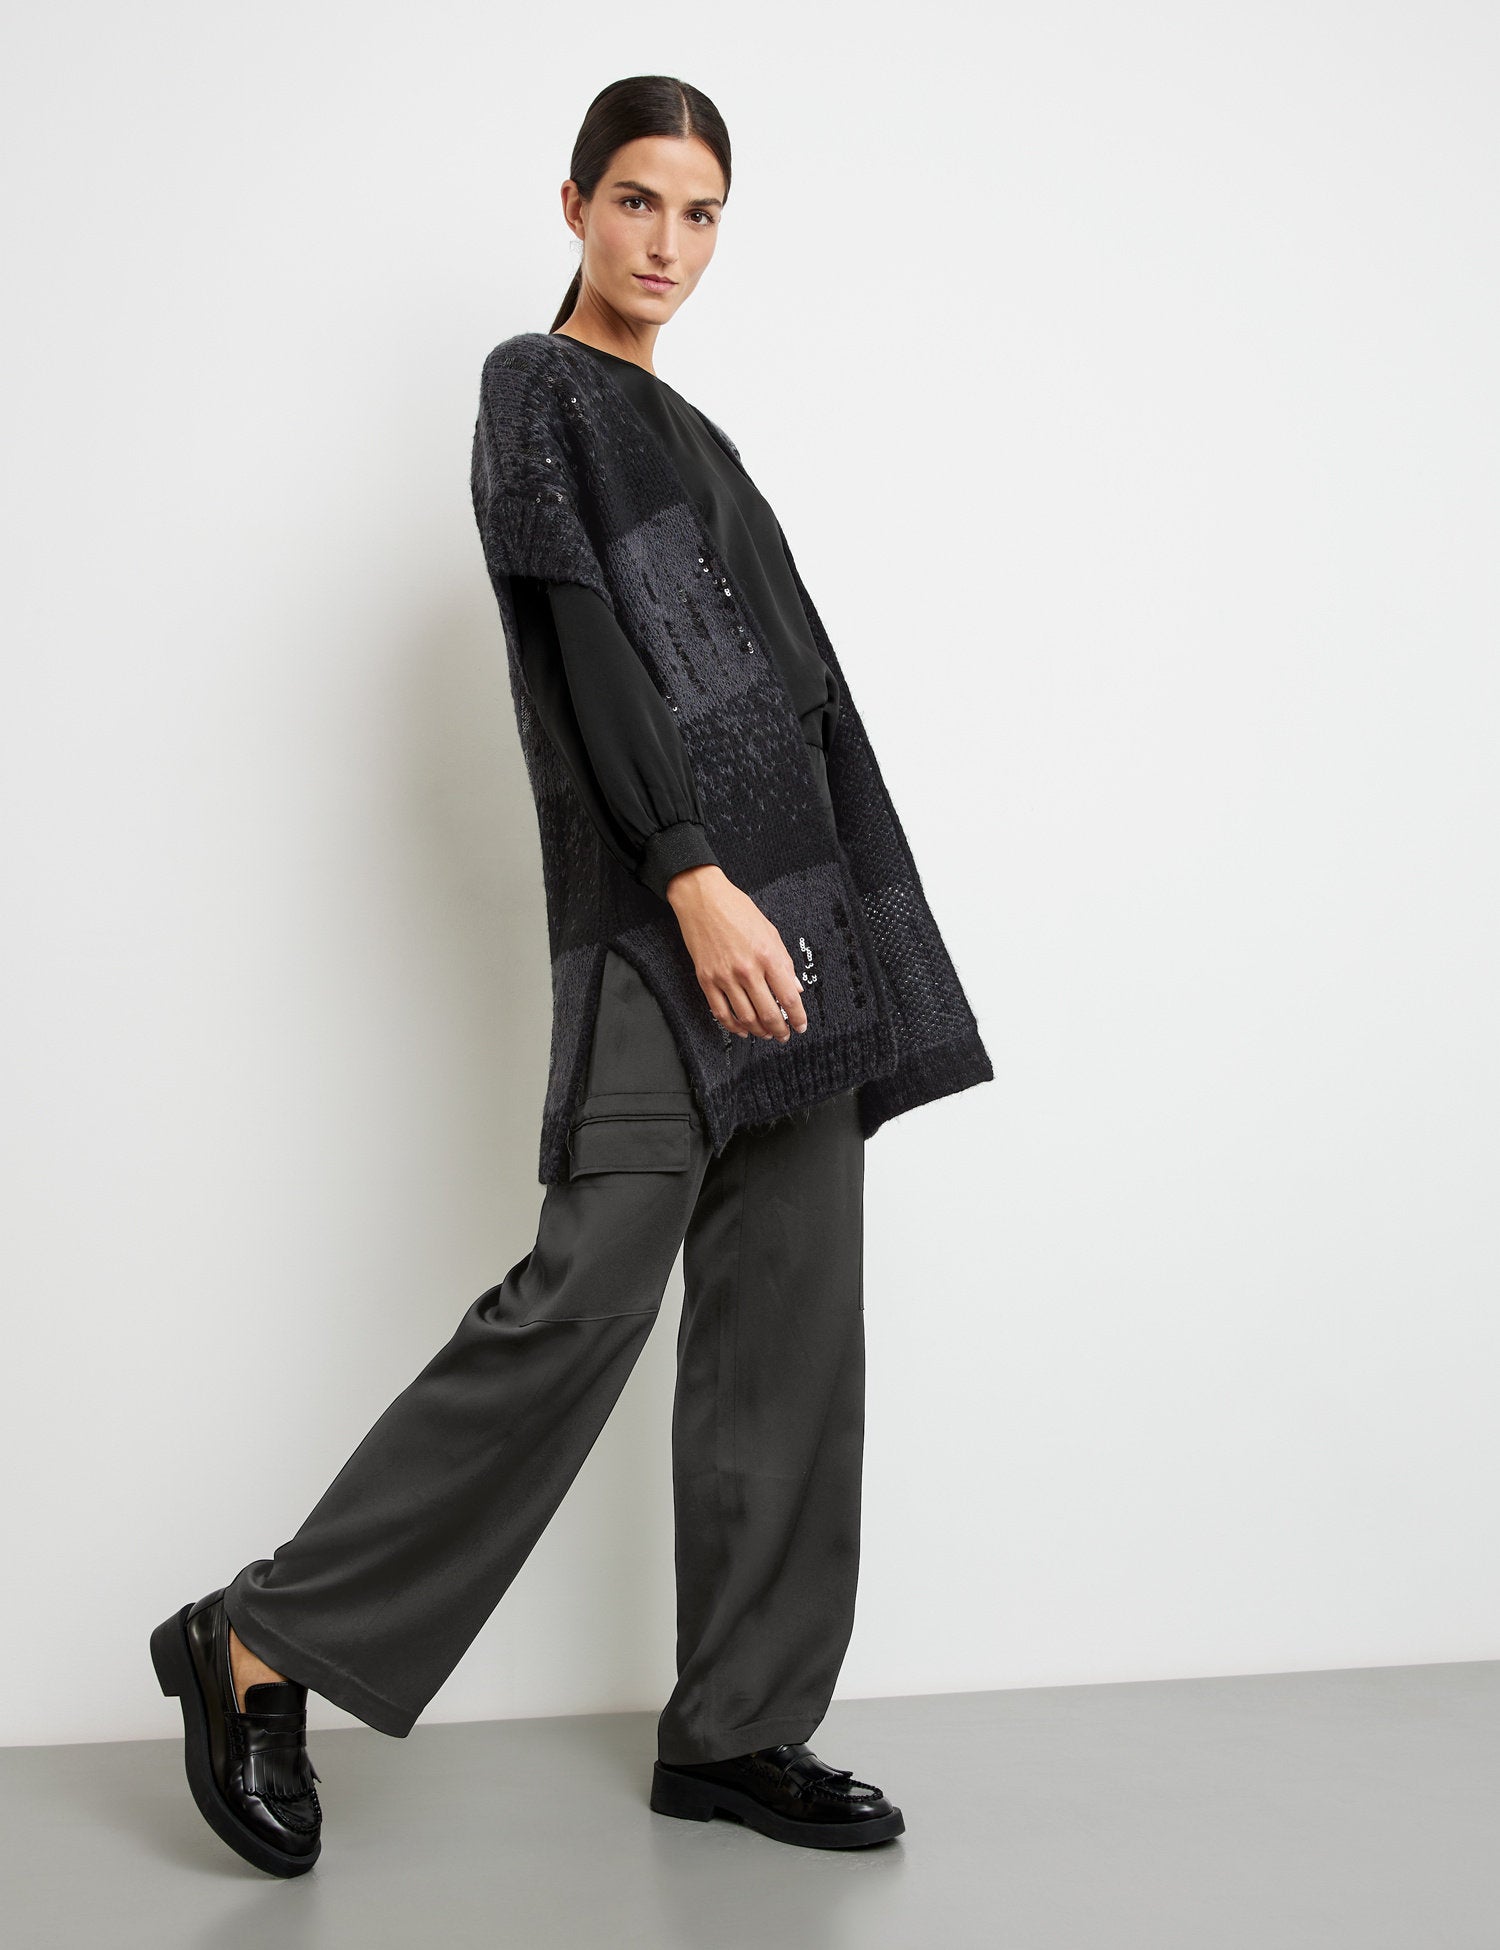 Long Cardigan With Short Sleeves And Sequin Embellishment_230055-35734_2010_05